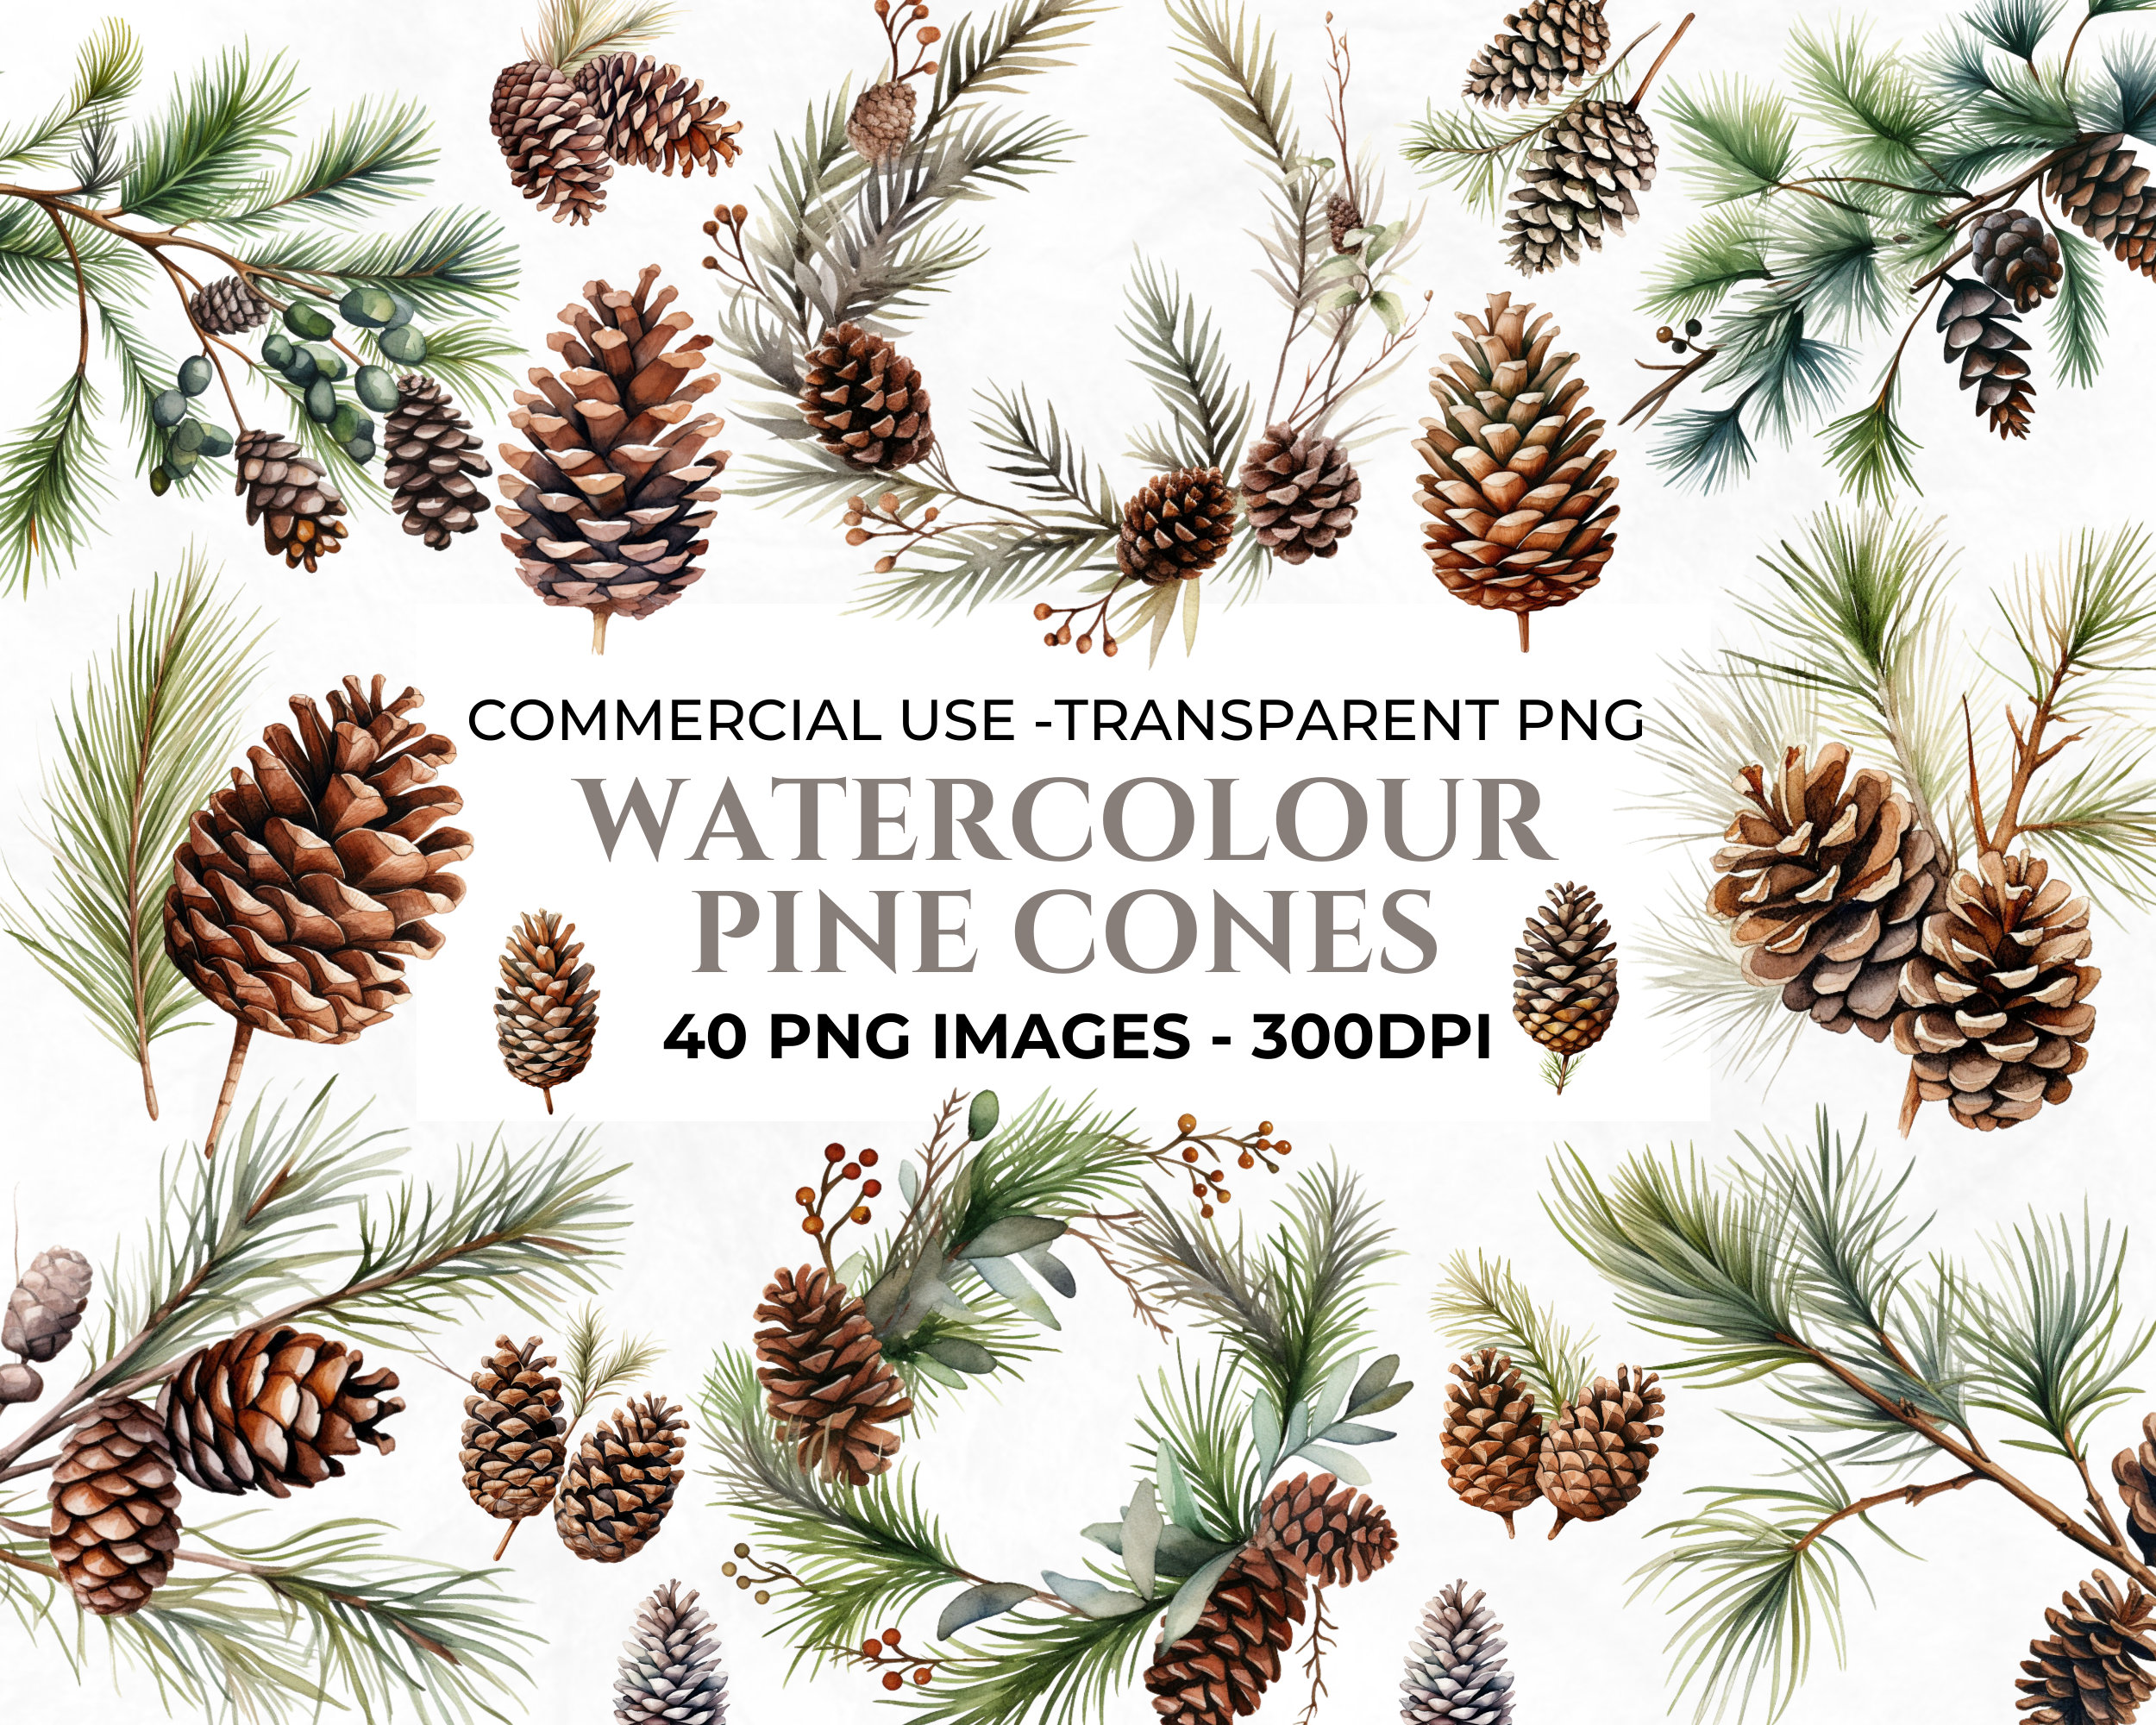 Evergreen Pine Branches With Cones Under The Snow, Winter Trees In The Snow  In Winter, Christmas, Pine Cone PNG Transparent Image and Clipart for Free  Download